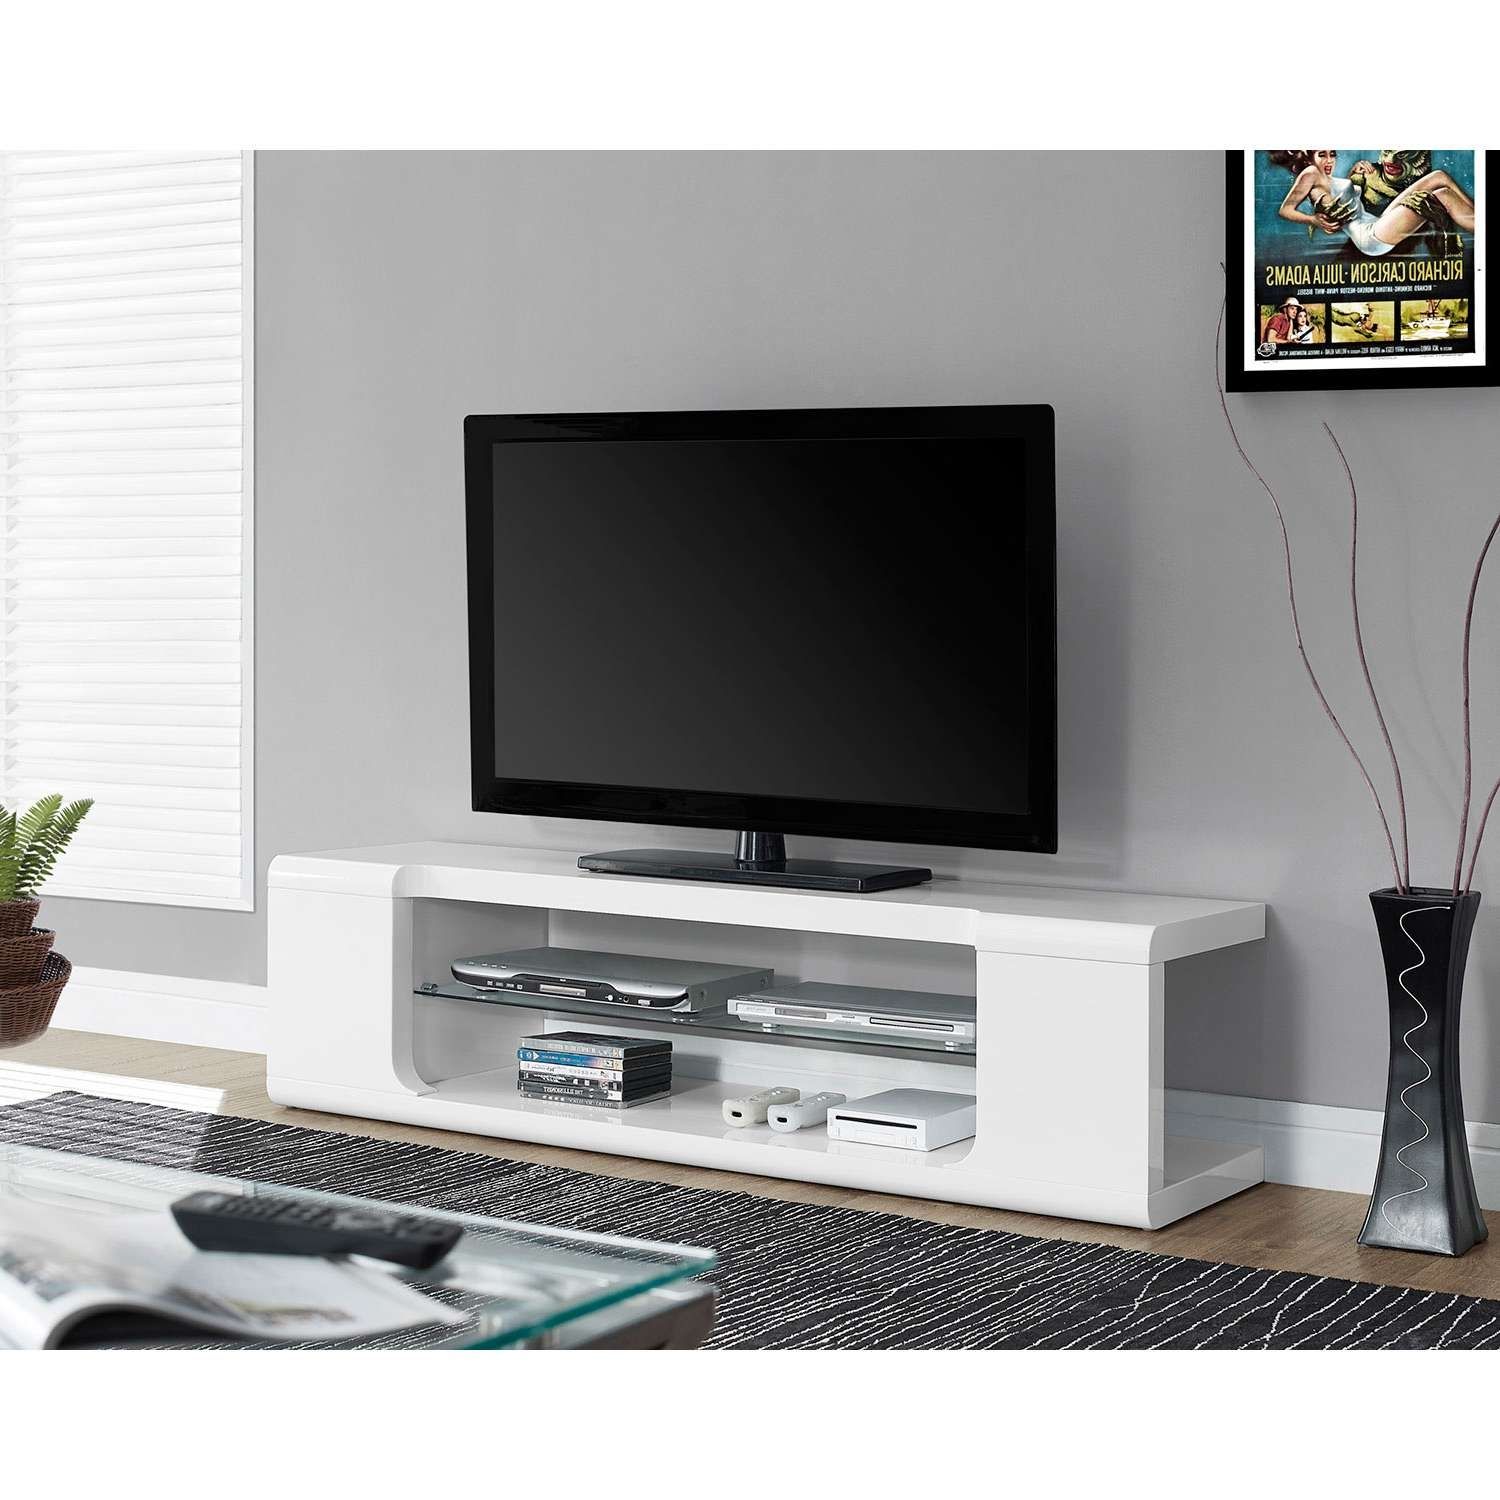 Monarch Tv Stand For Tvs Up To 60" (i 3535) – Glossy White : Tv Intended For Modern Glass Tv Stands (Gallery 15 of 15)